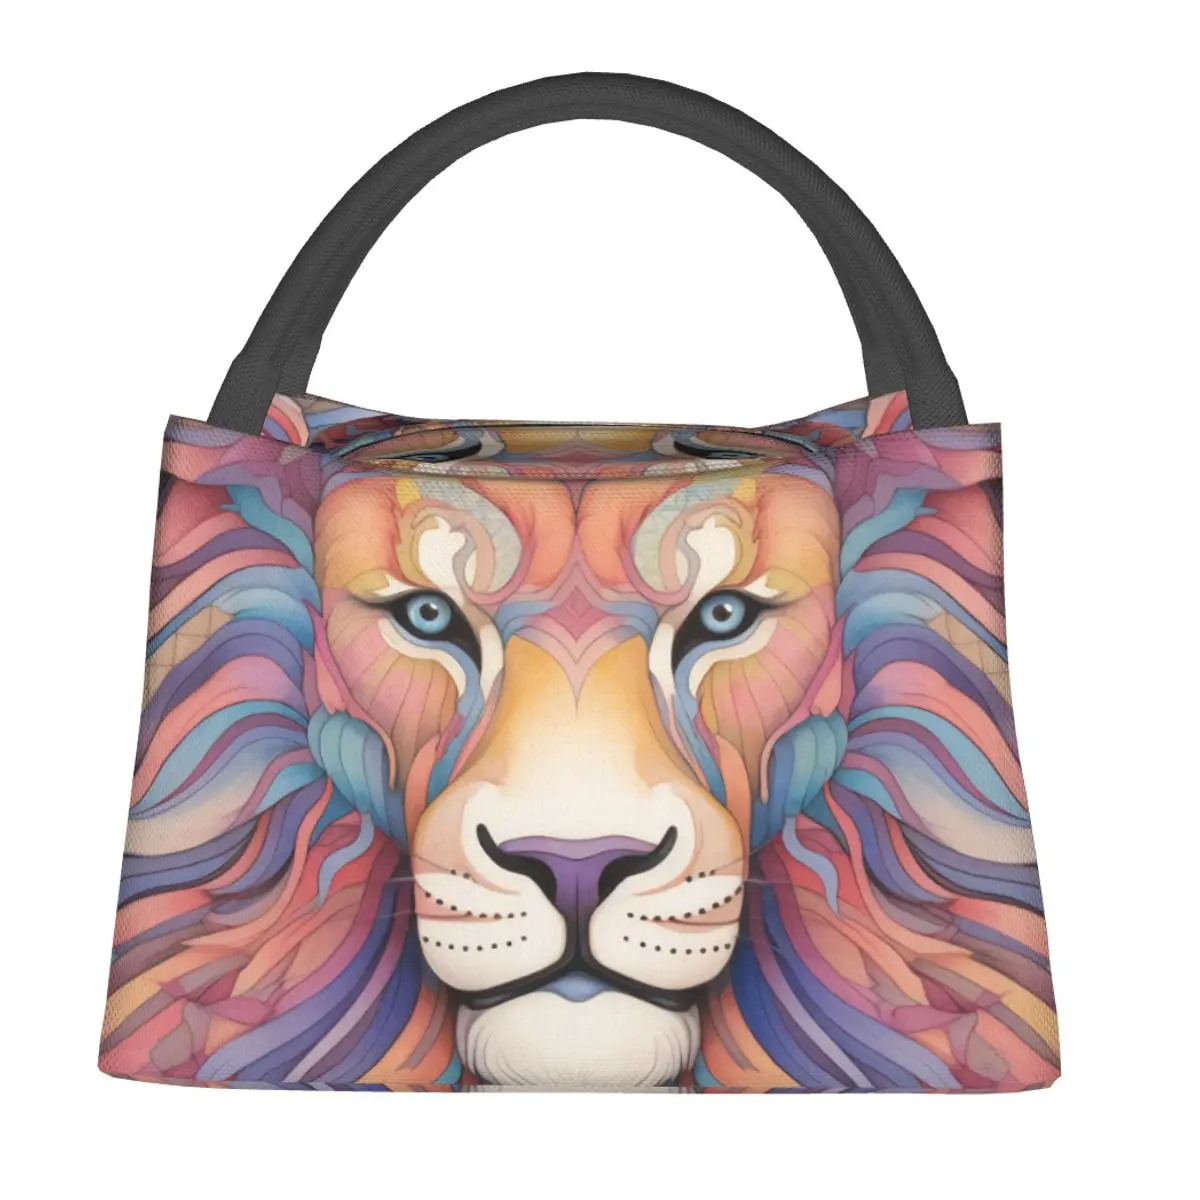 

Lion Lunch Bag For Unisex Colored Cartoon Pencil Art Print Lunch Box Casual Travel Cooler Bag Portable Oxford Thermal Lunch Bags